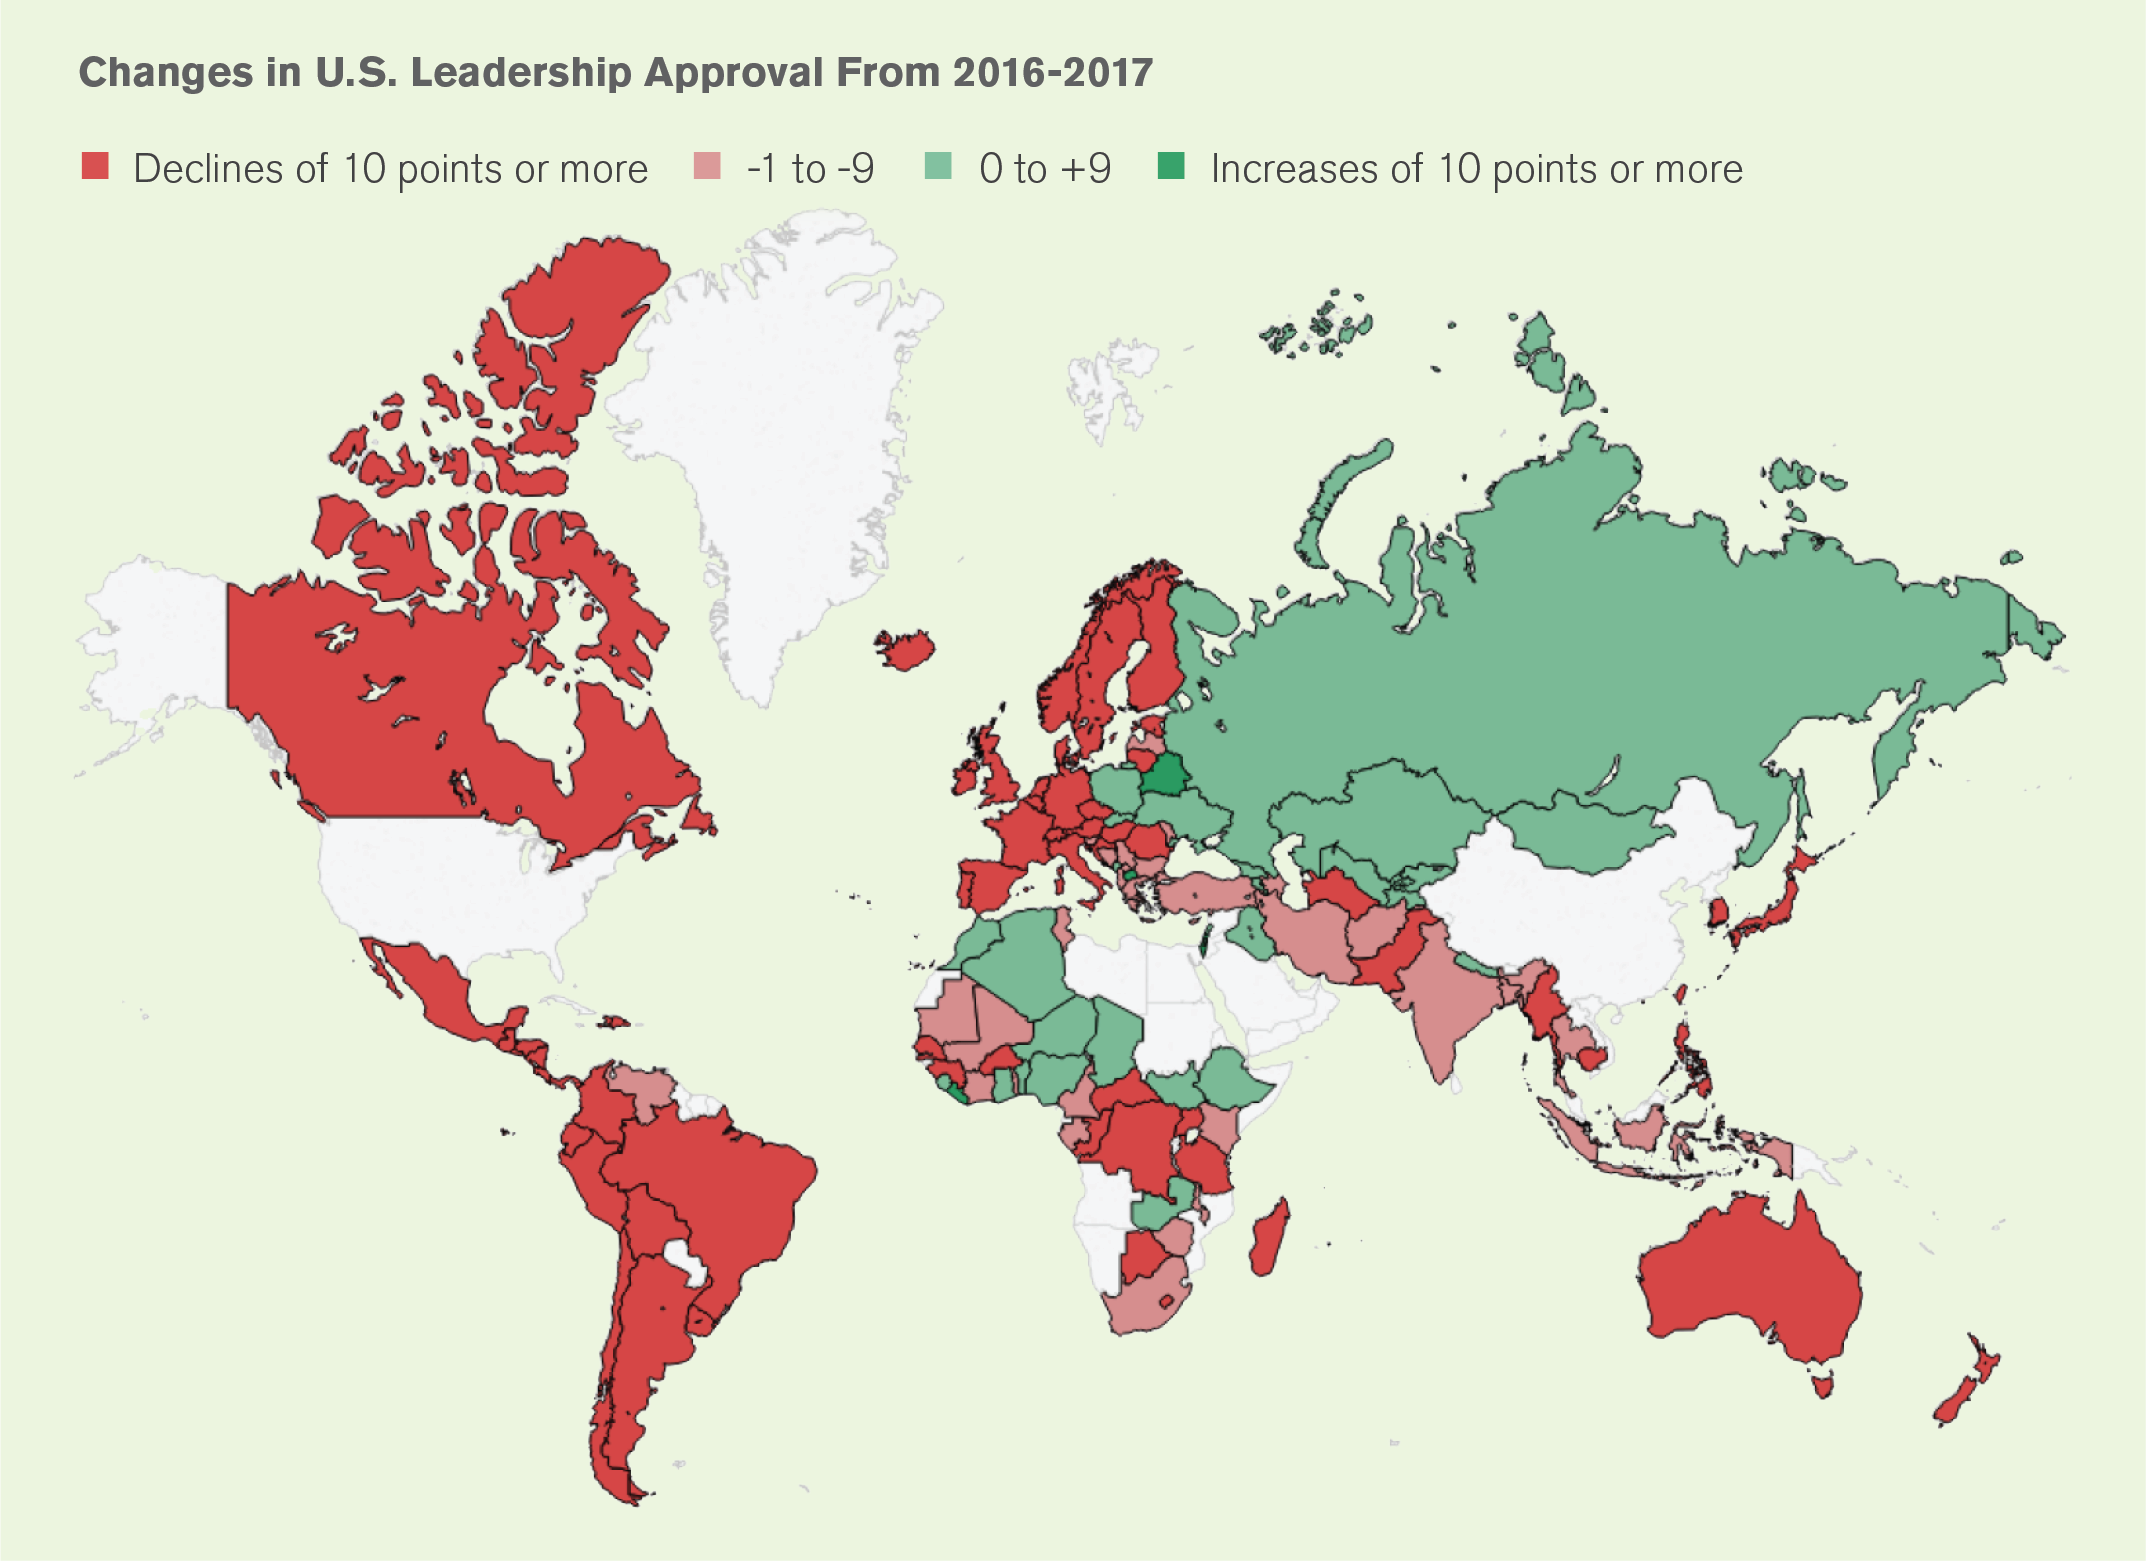 Changes in U.S. Leadership Approval From 2016-2017